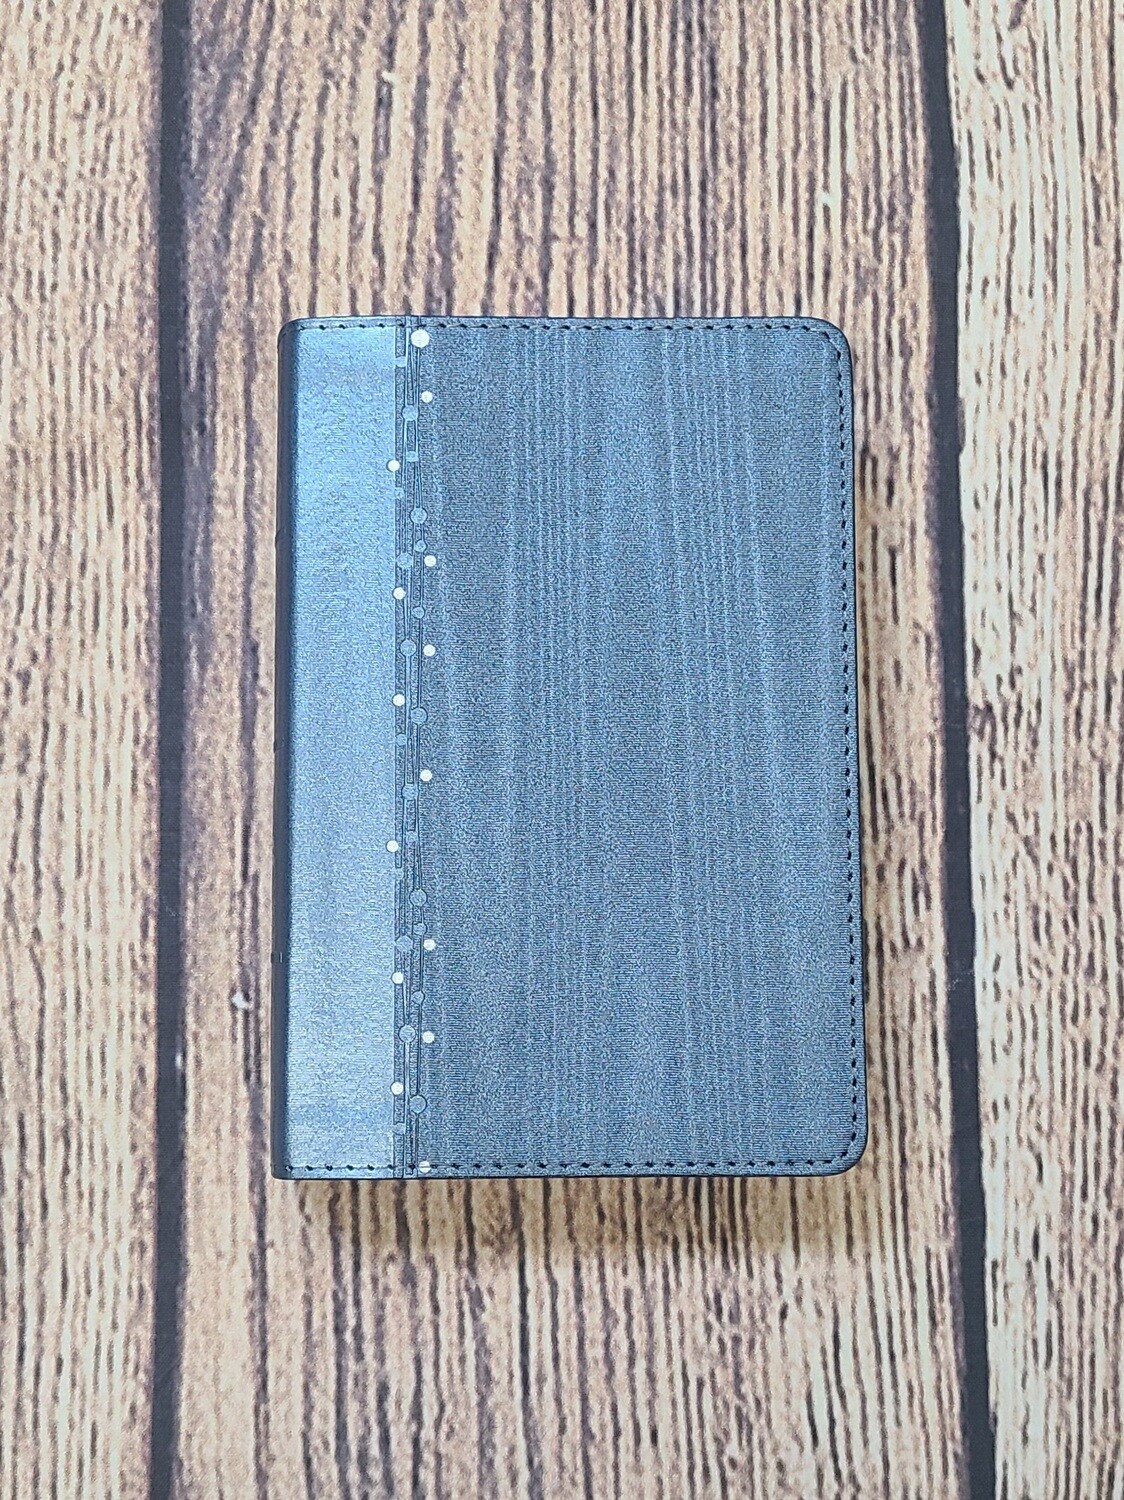 CSB On-The-Go Bible - Slate Blue LeatherTouch